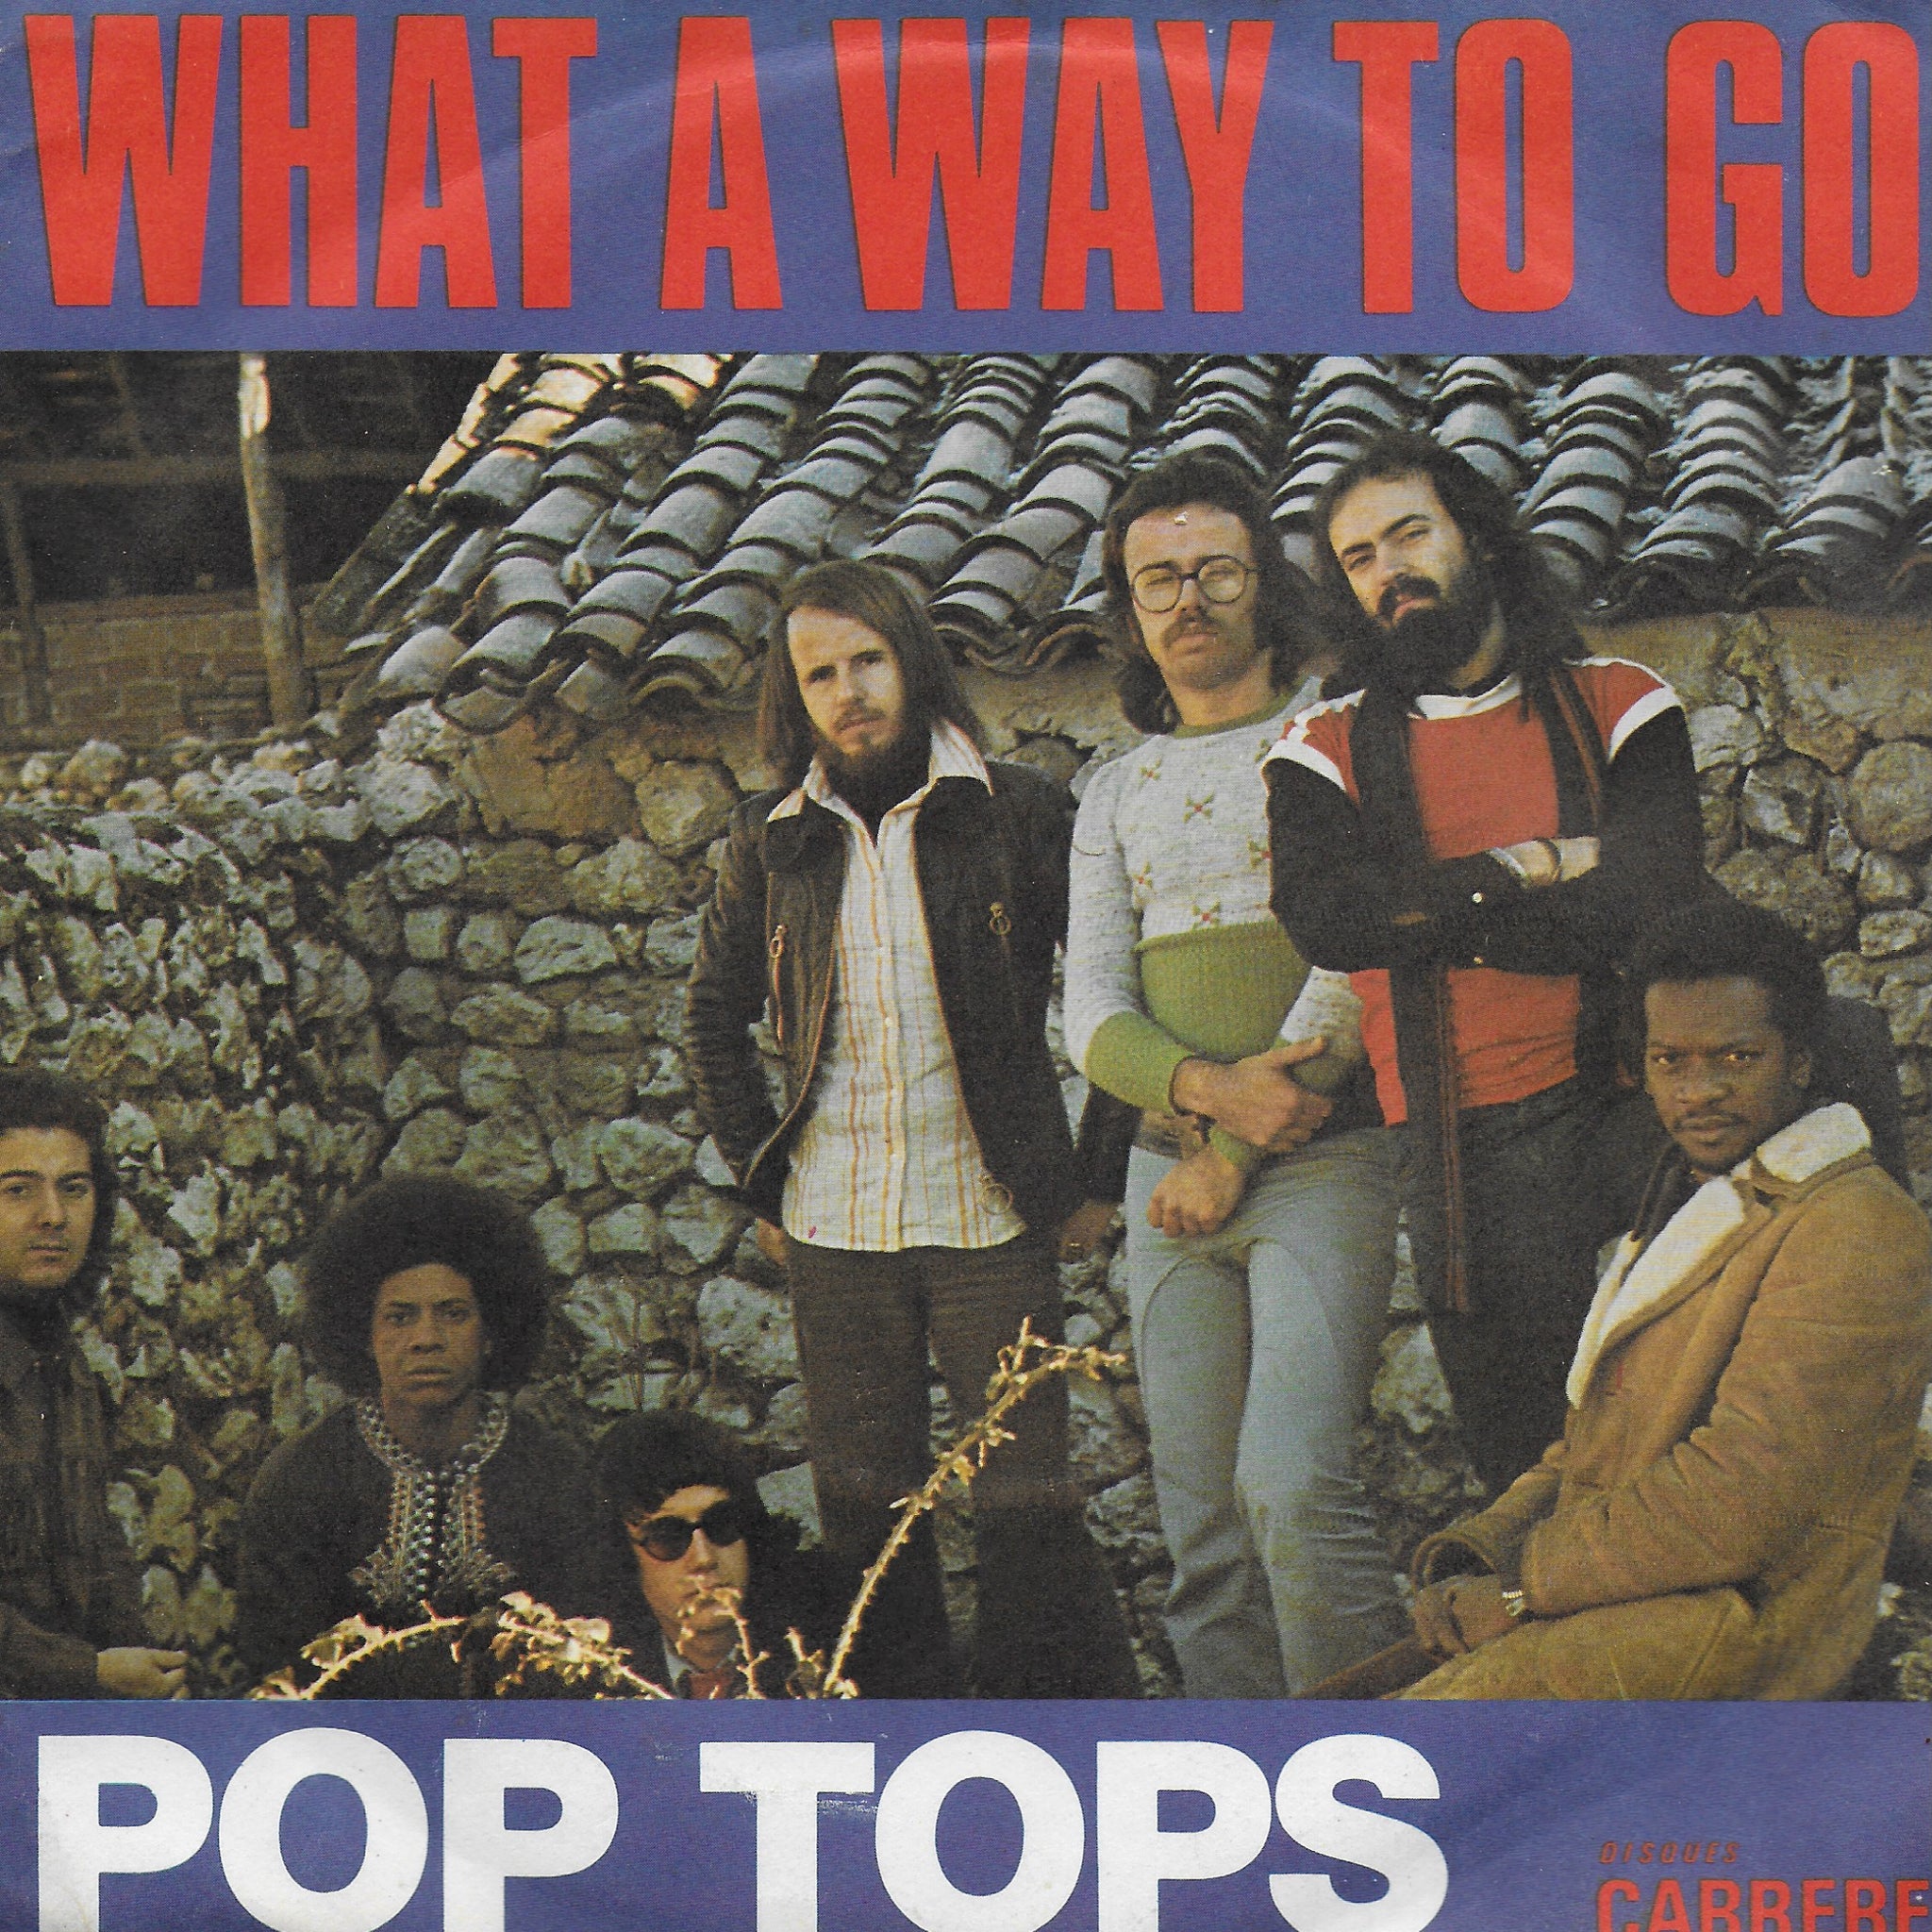 Pop Tops - What a way to go (Franse uitgave)